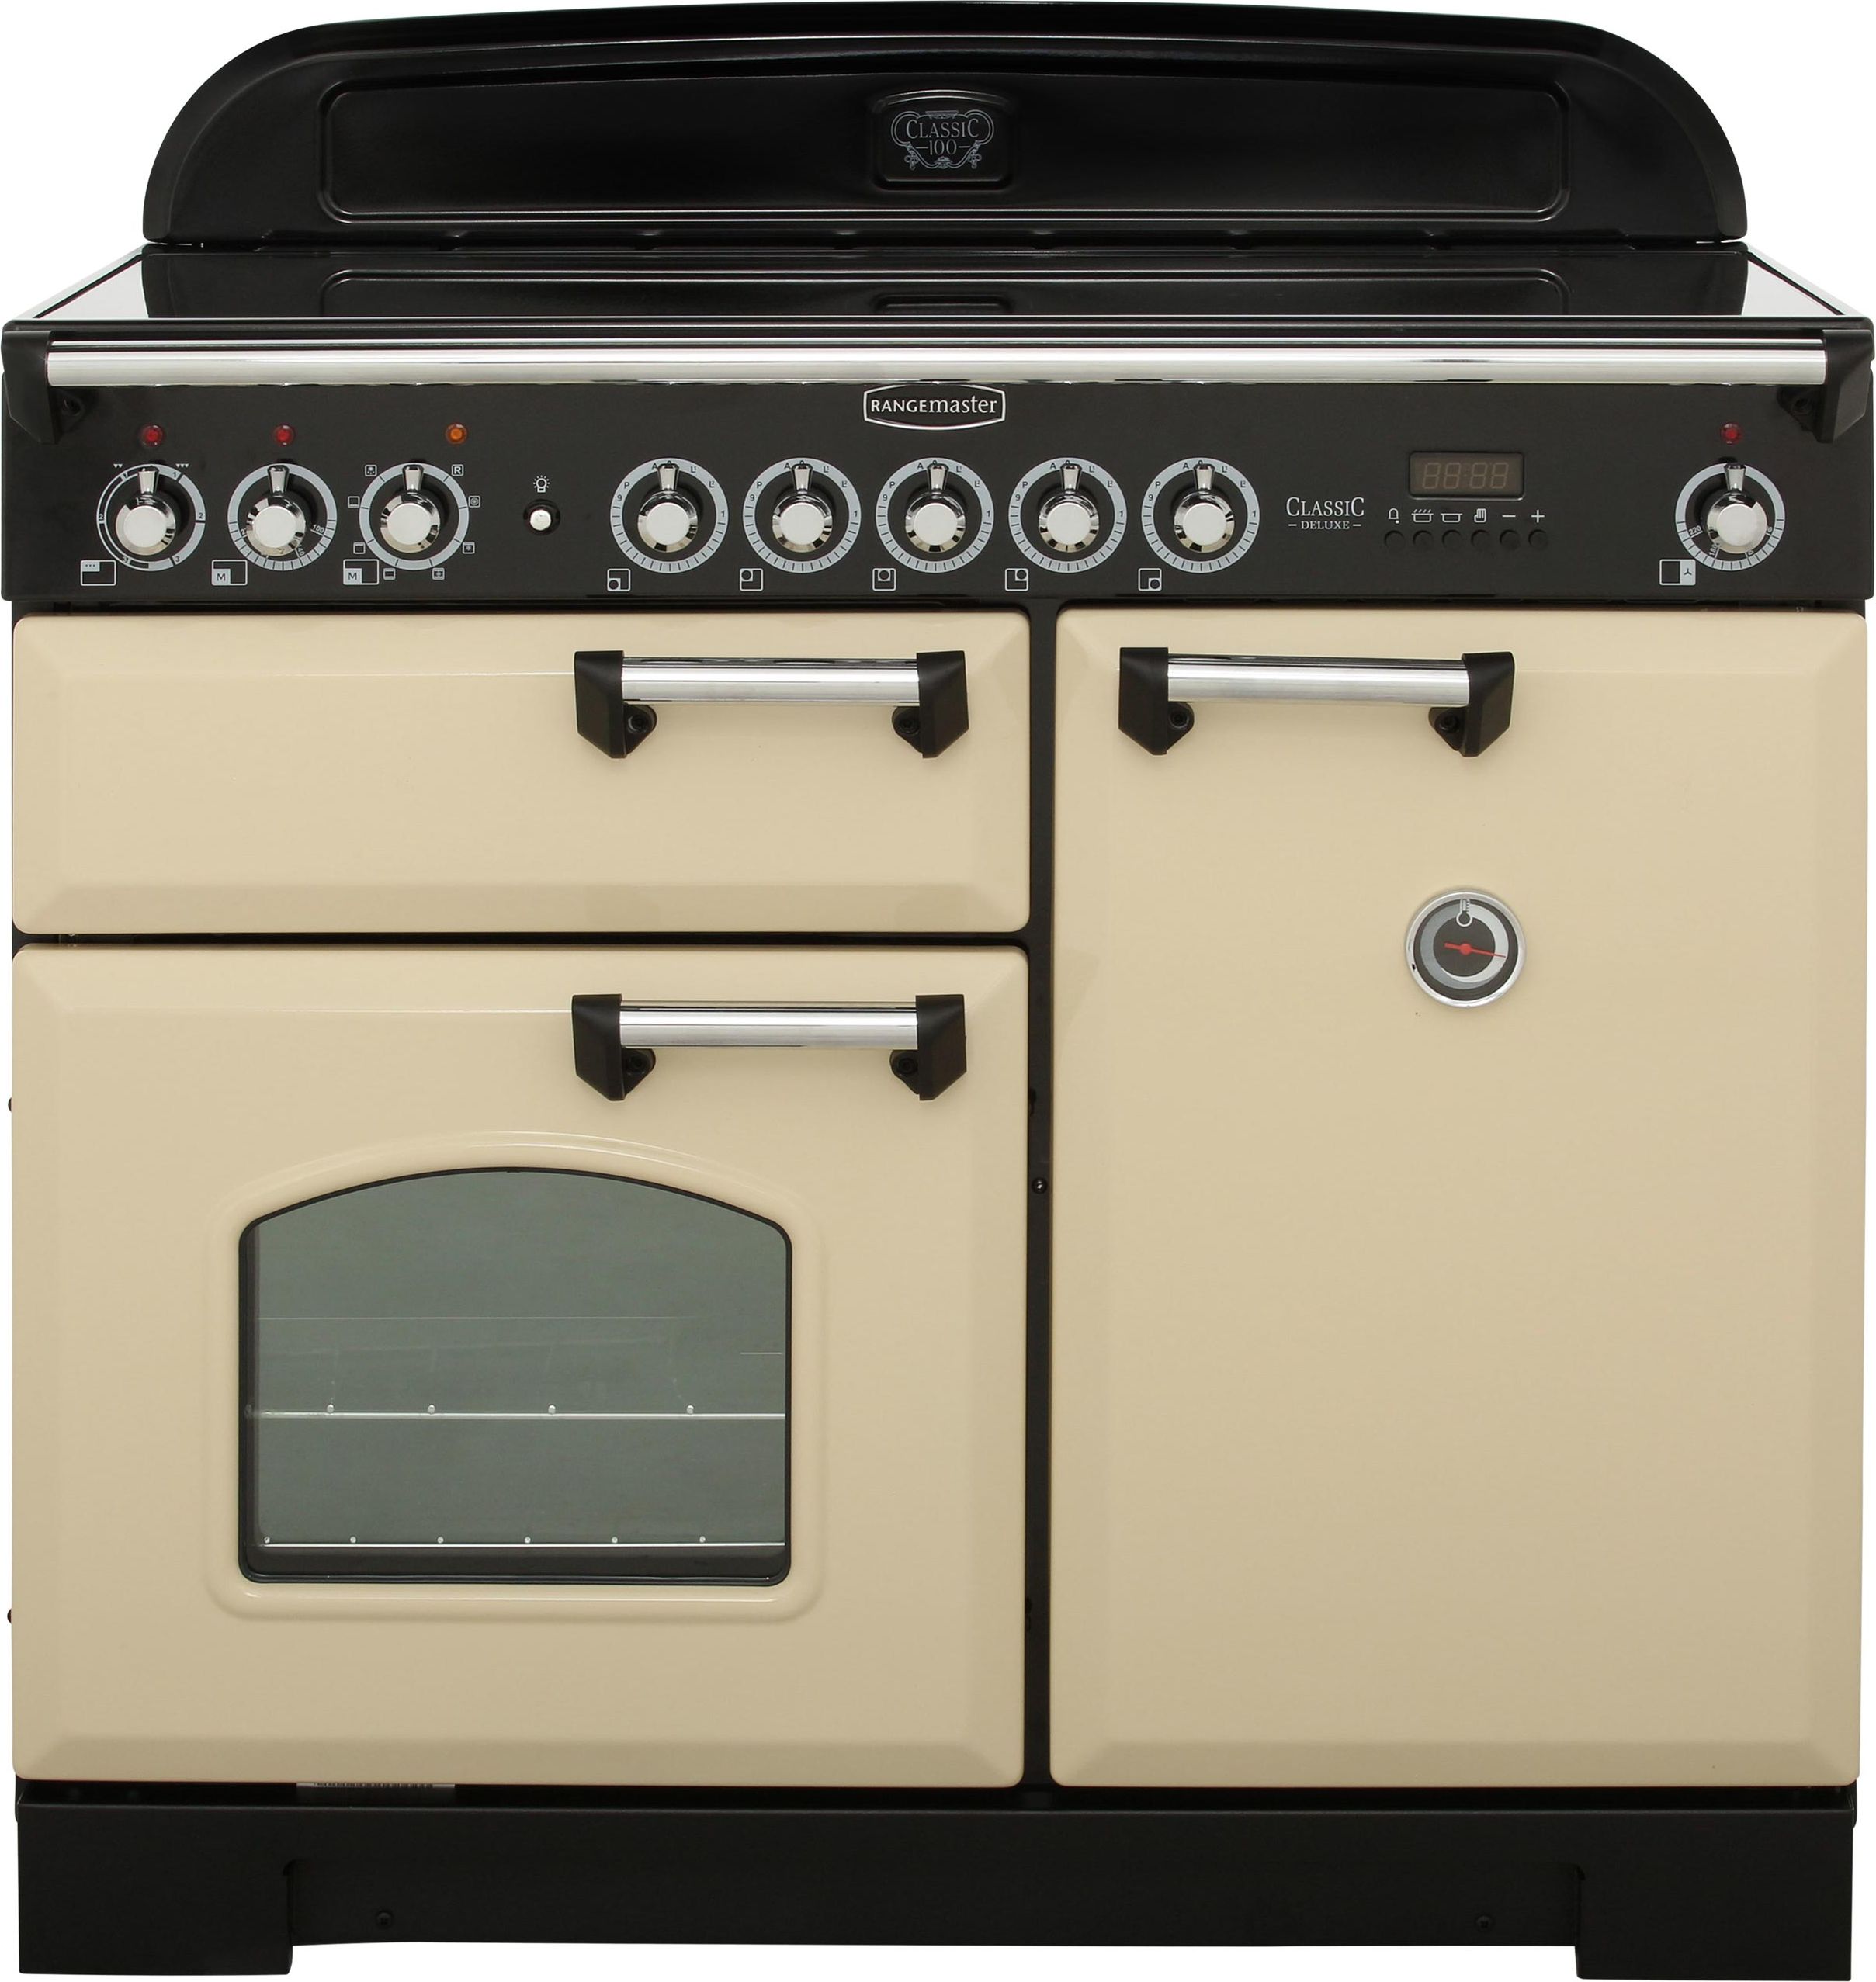 Rangemaster Classic Deluxe CDL100EICR/C 100cm Electric Range Cooker with Induction Hob - Cream / Chrome - A/A Rated, Cream